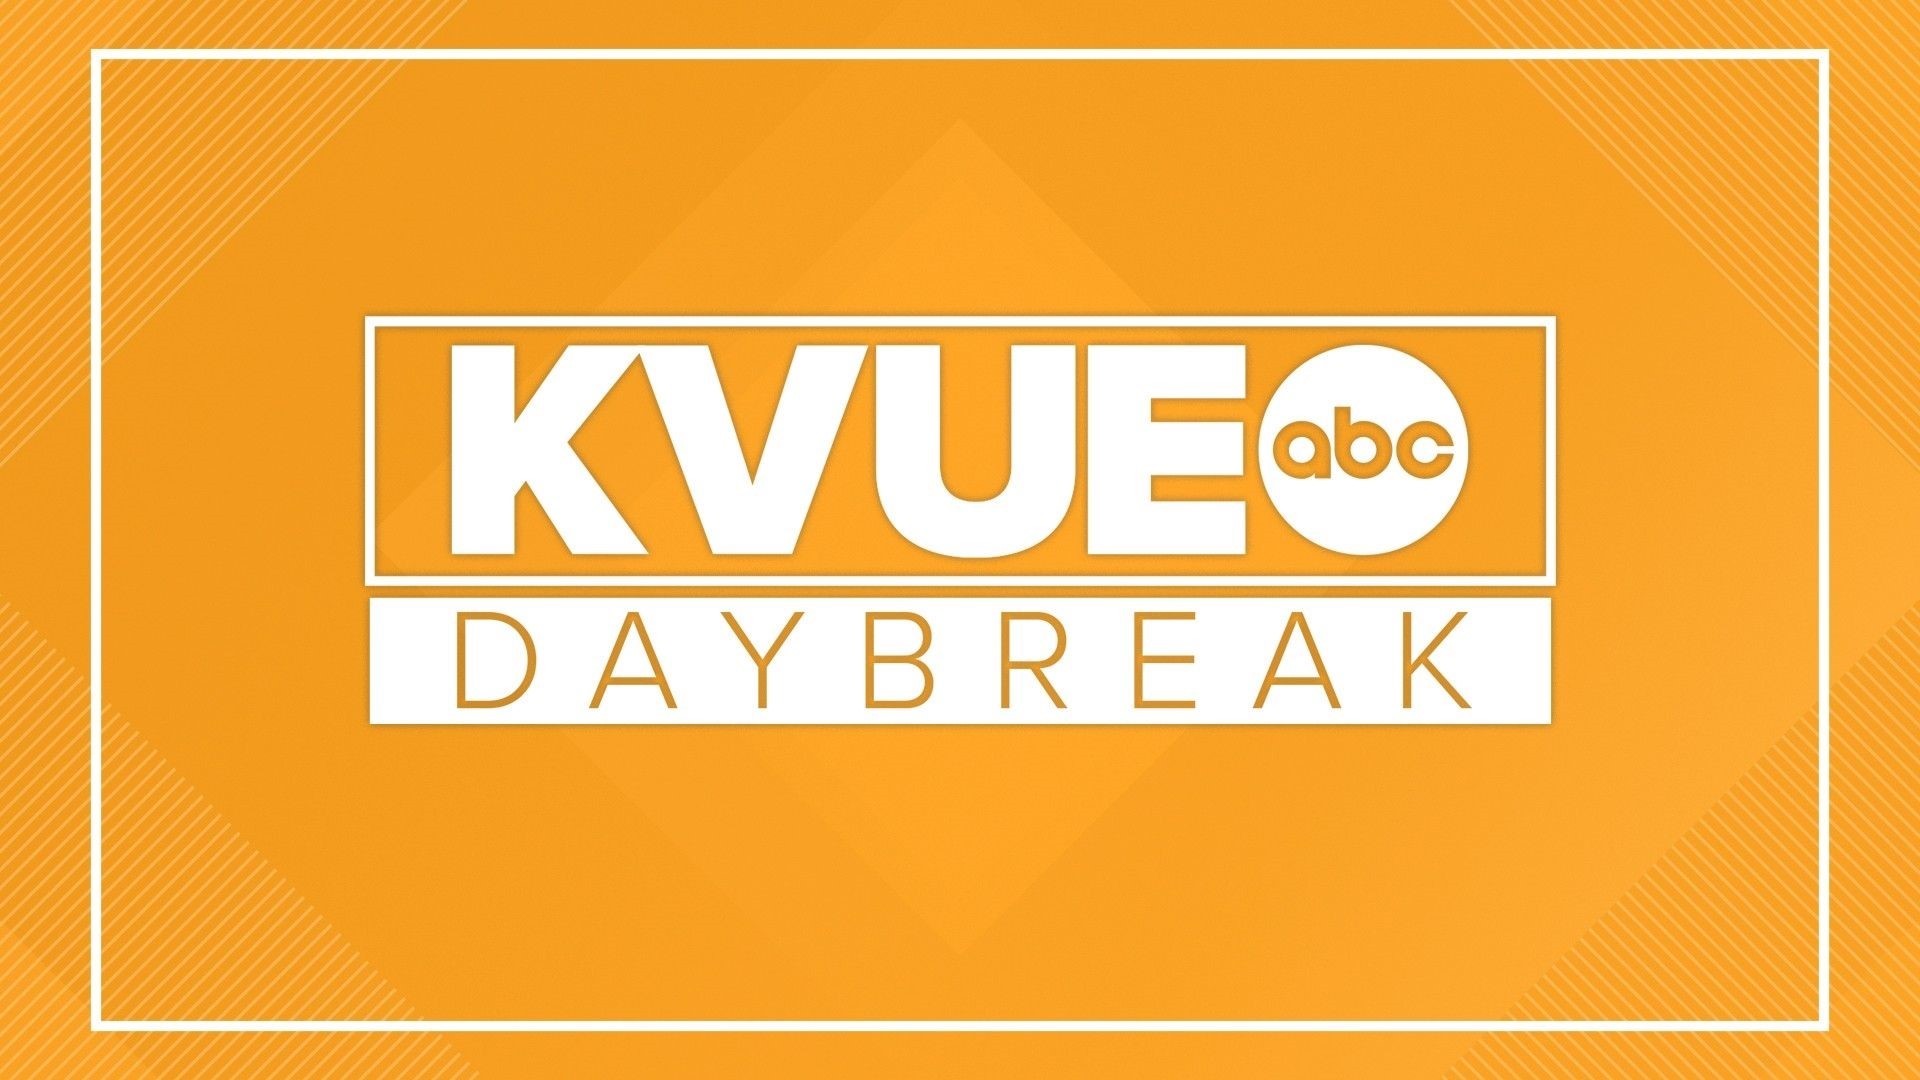 The KVUE News team provides a look at local, regional, statewide and national news events and the latest information on local traffic and weather issues.